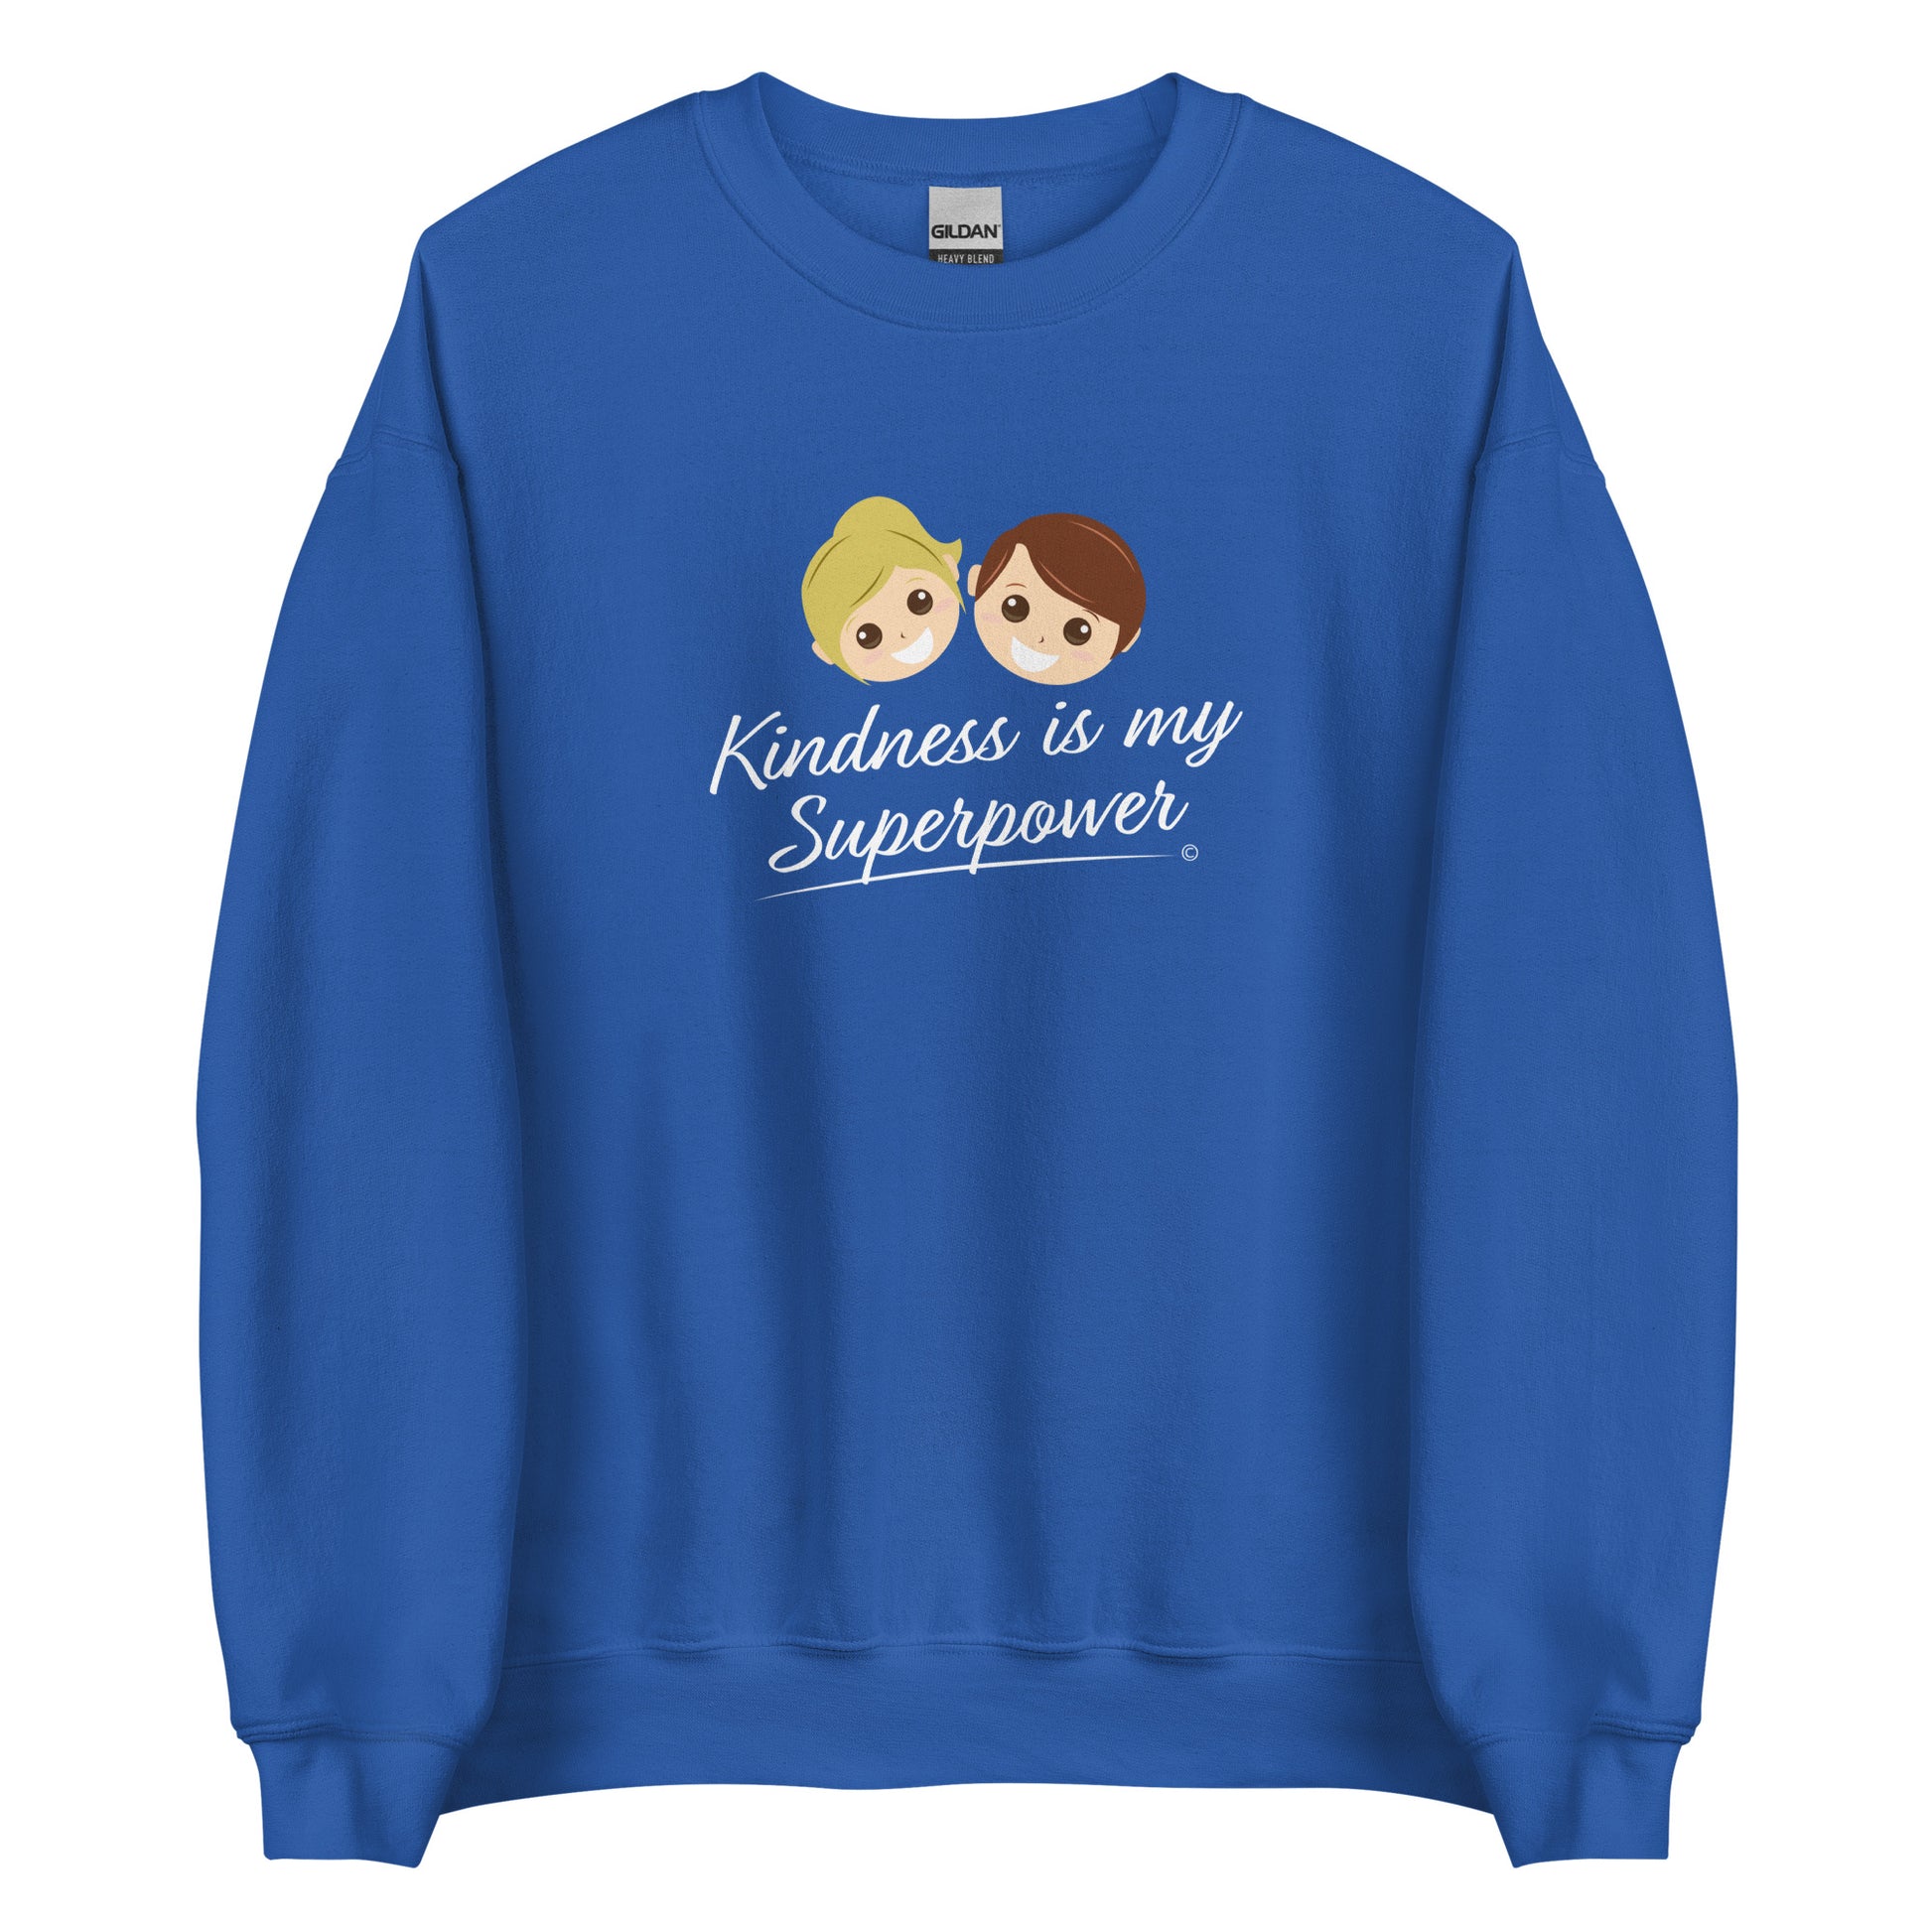 A cozy unisex sweatshirt in royal blue featuring the uplifting quote 'Kindness is my Superpower' in bold lettering.